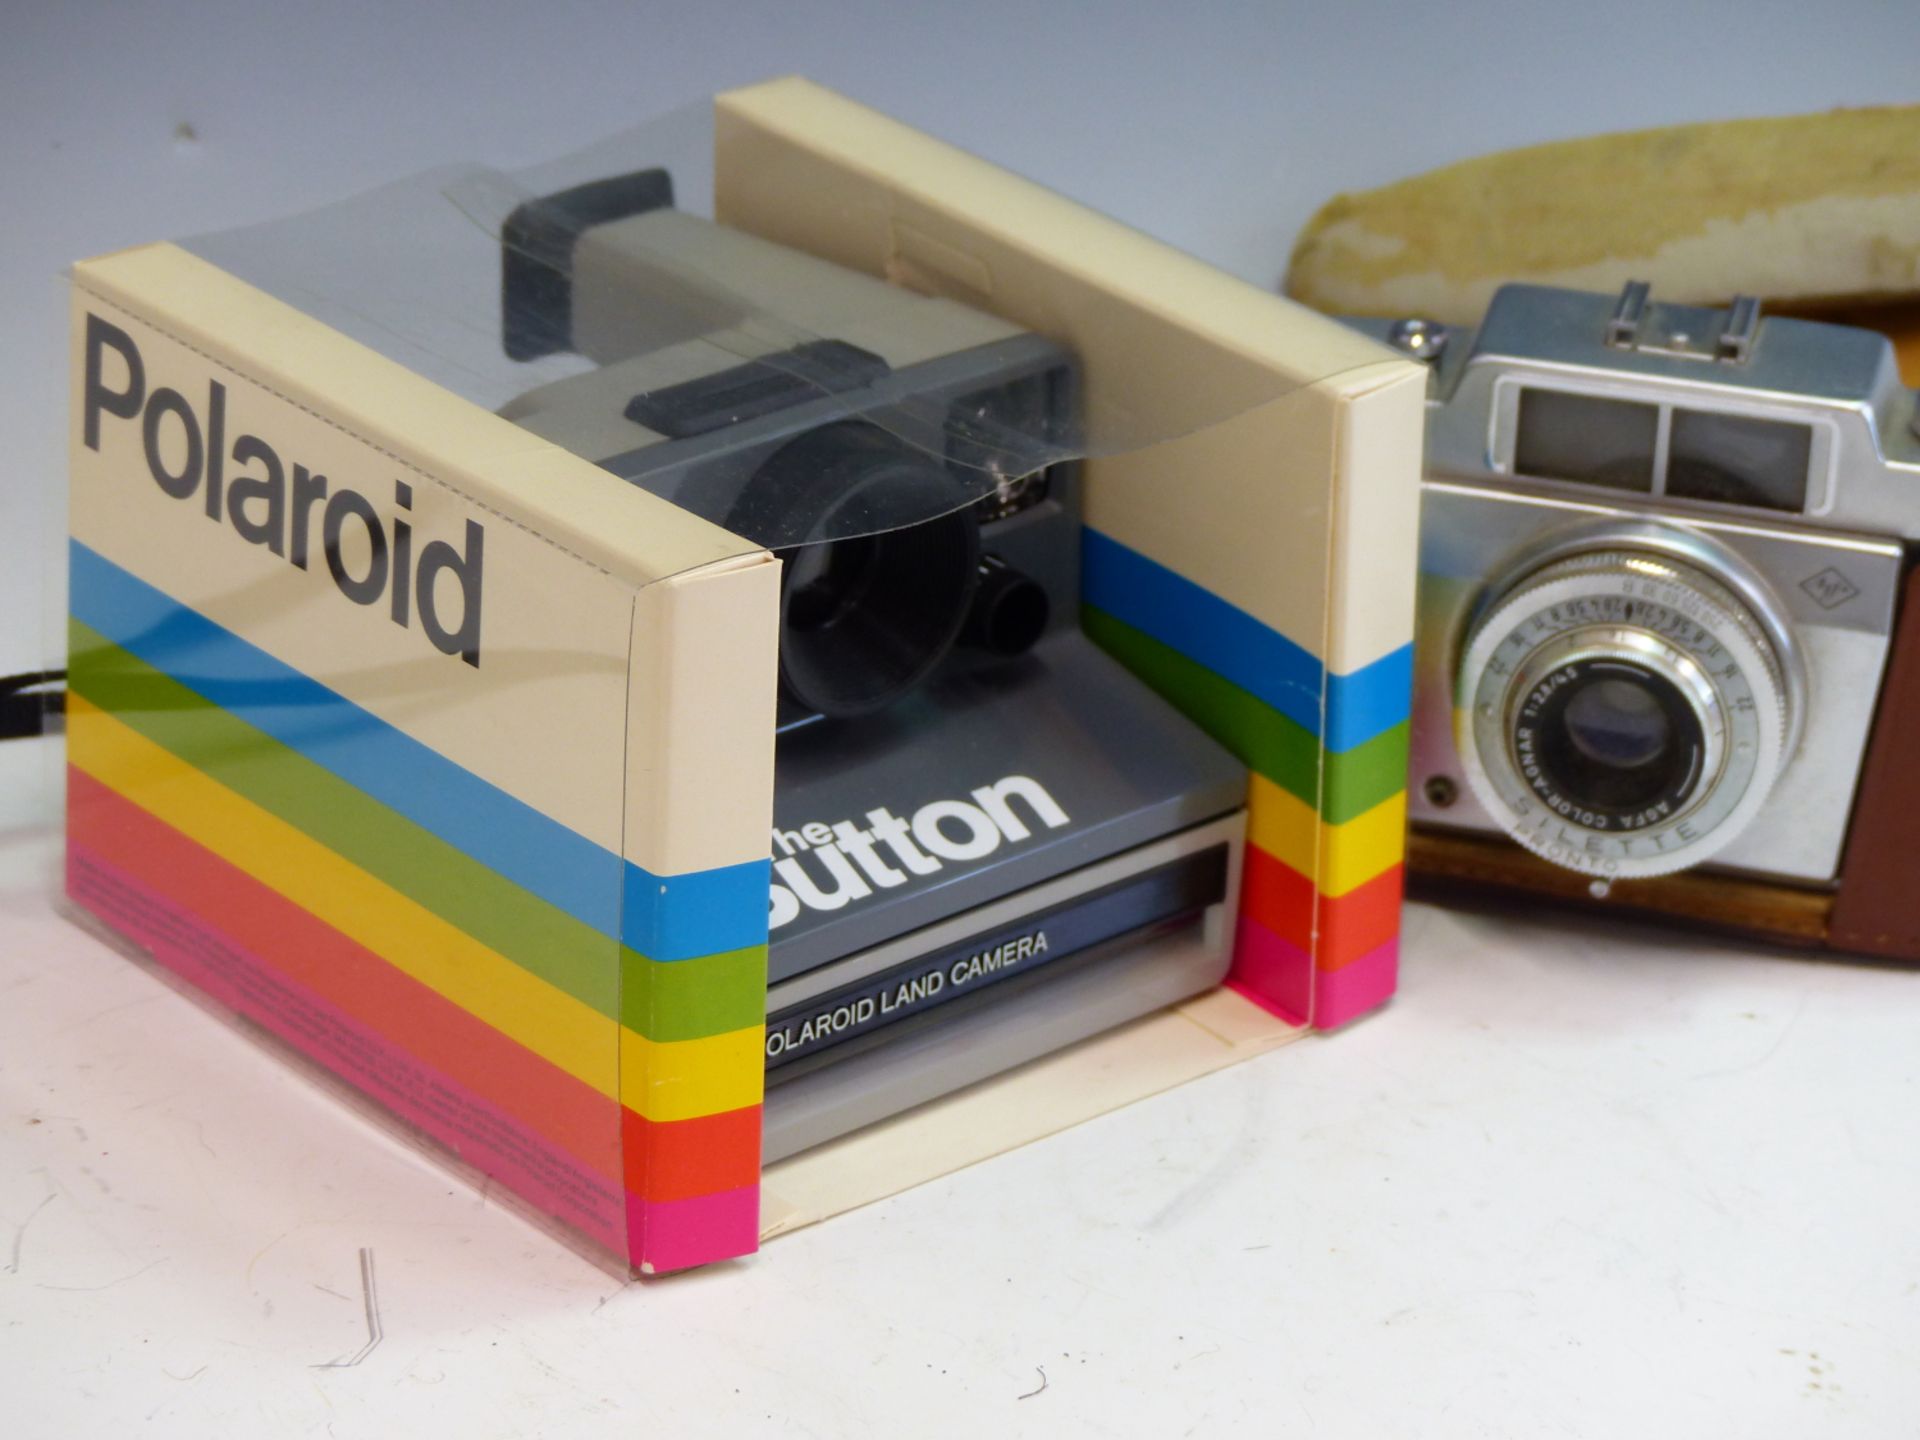 A POLAROID LAND CAMERA "THE BUTTON" IN ORIGINAL PACKAGING WITH MANUAL. TOGETHER WITH AN AGFA SILETTE - Bild 2 aus 3